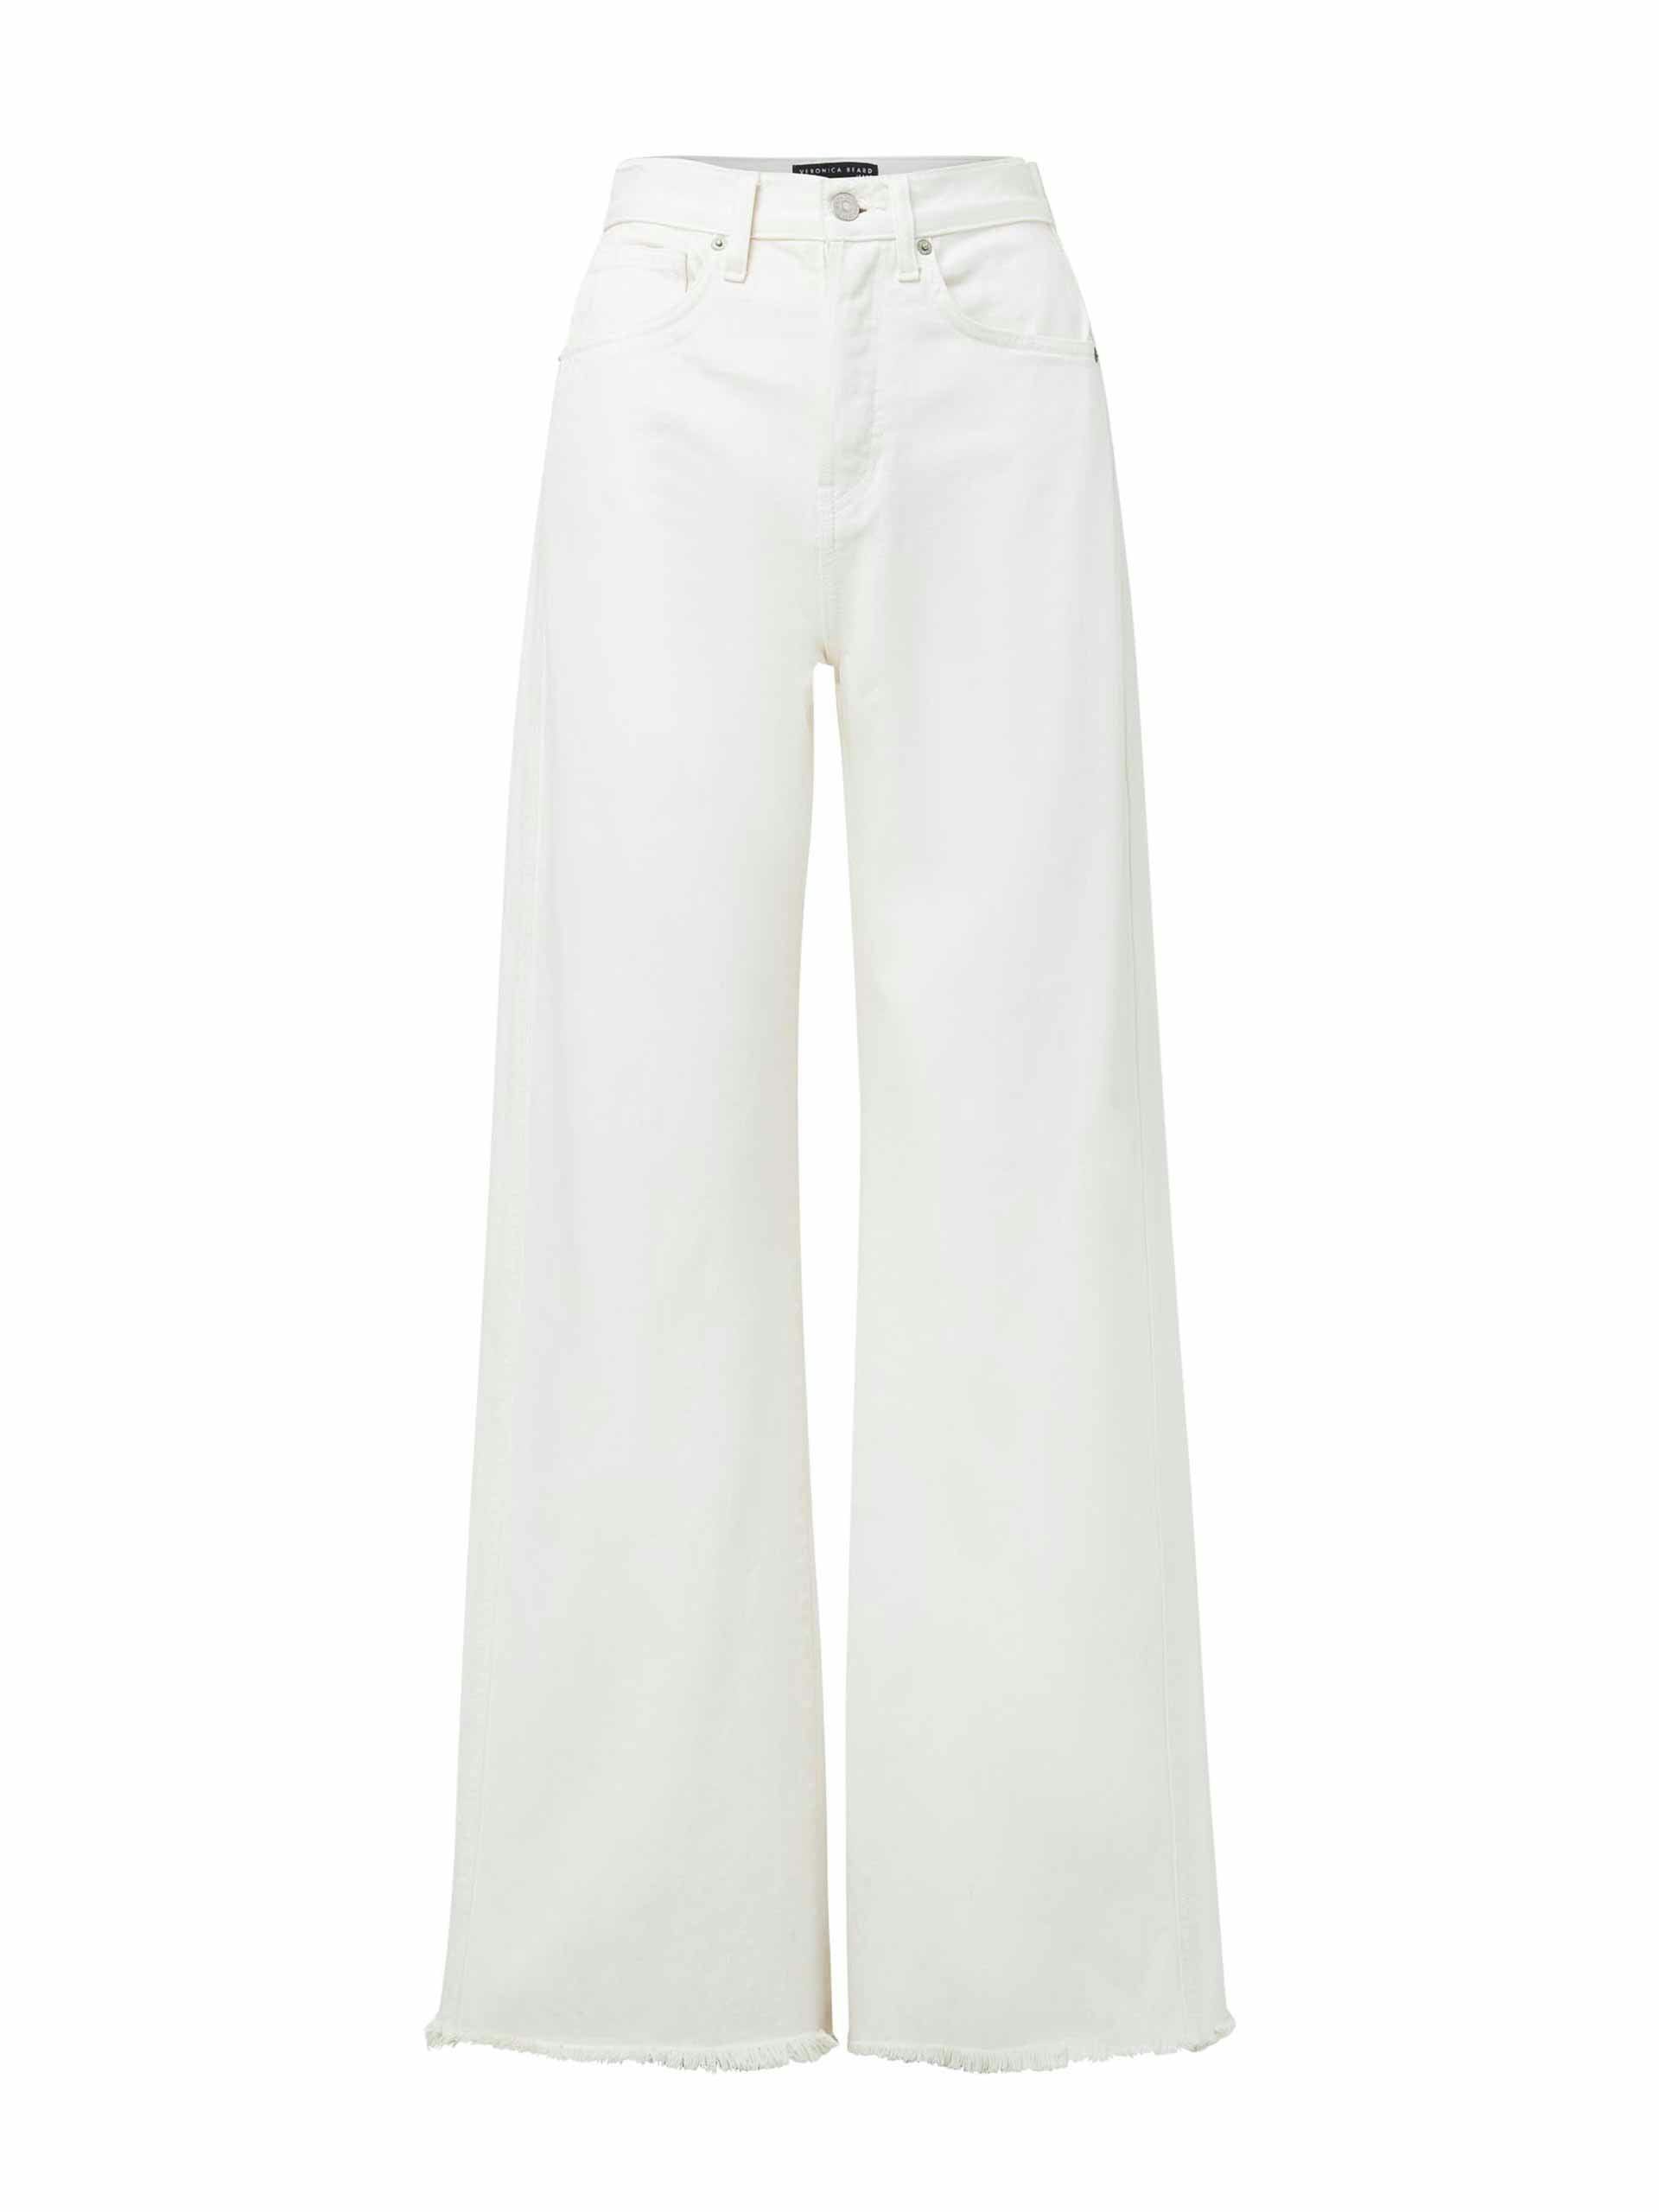 Taylor high rise wide leg jeans